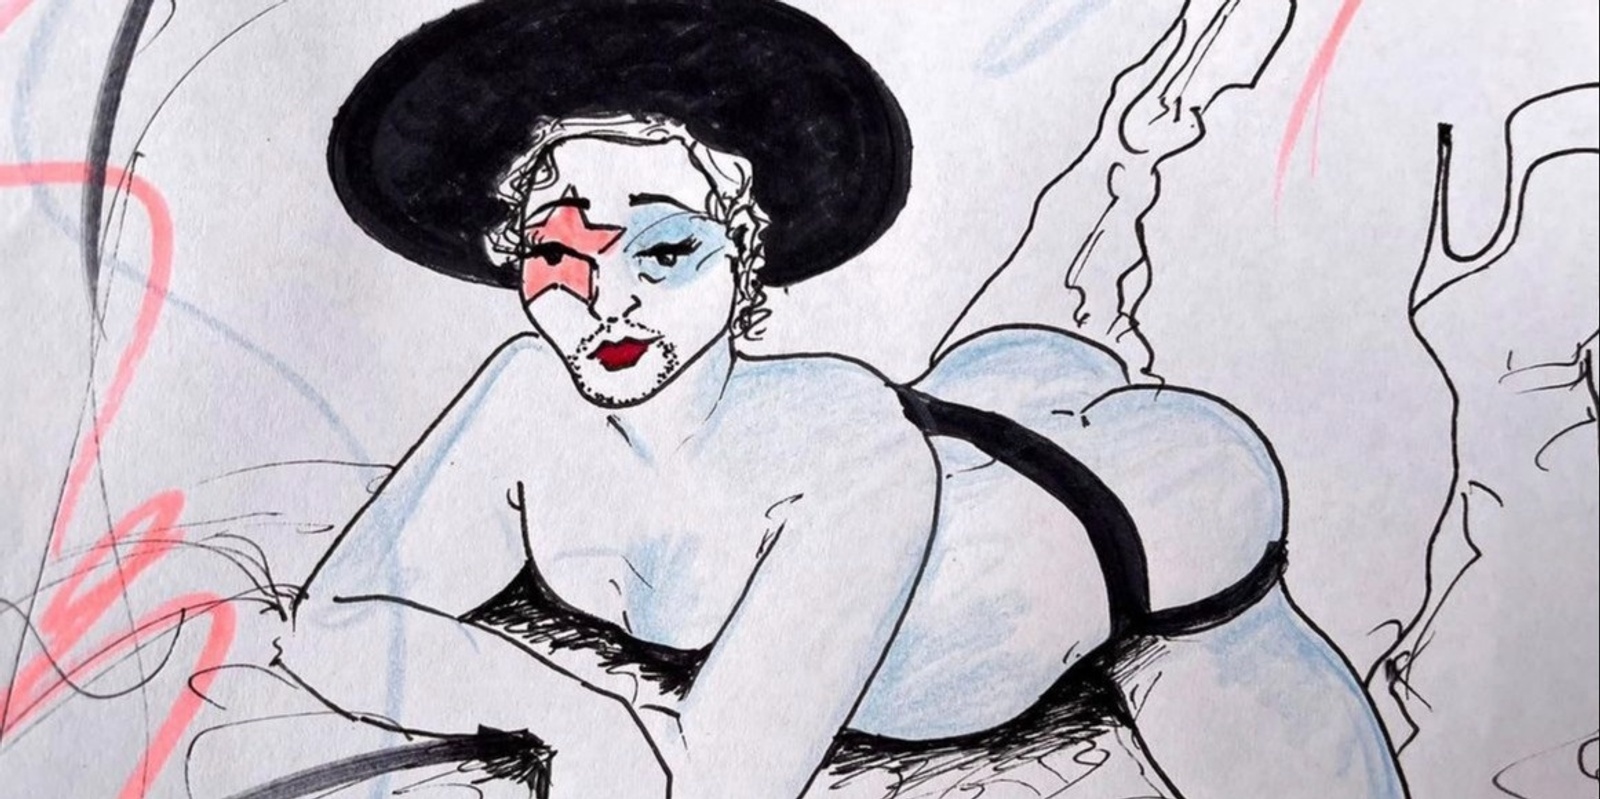 Banner image for Queer Life Drawing